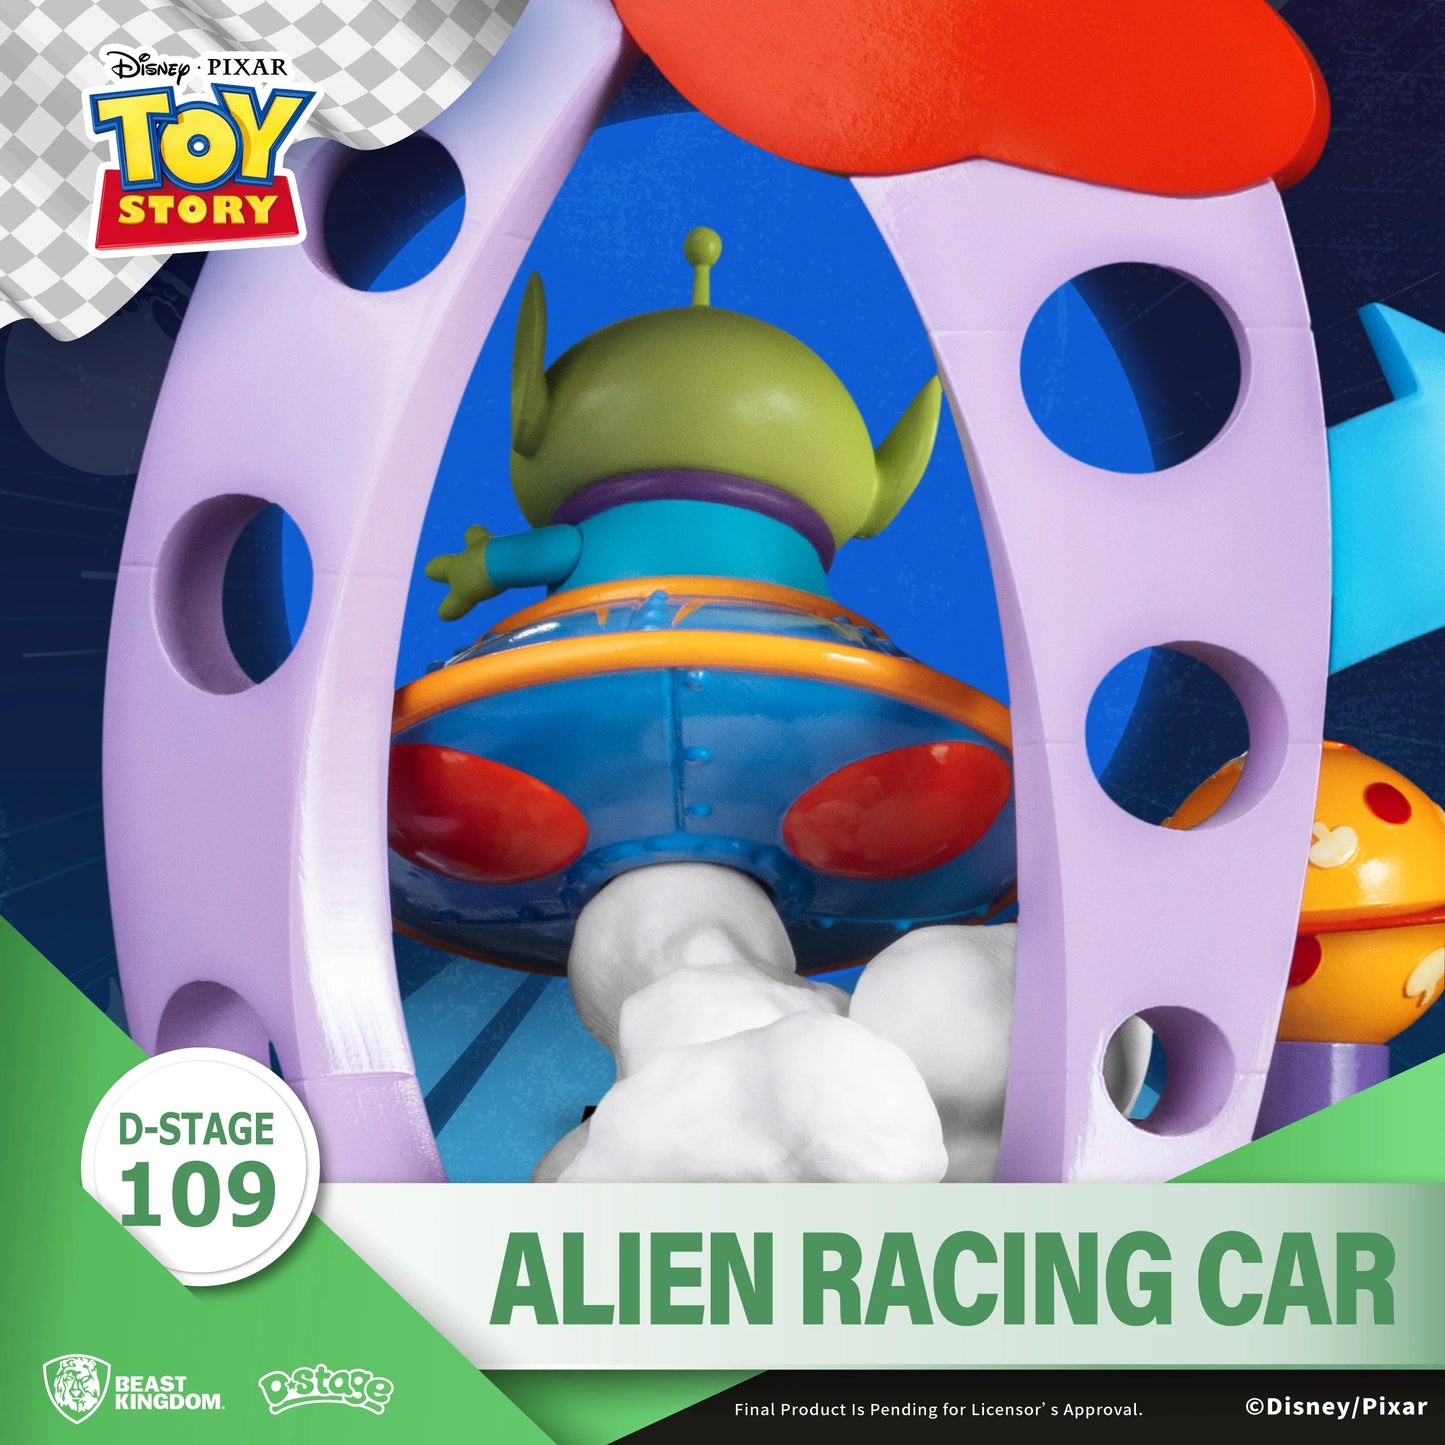 BEAST KINGDOM DS-109 Toy Story Alien's Racing Car Diorama Stage D-Stage Figure Statue - CRA5Y SHOP